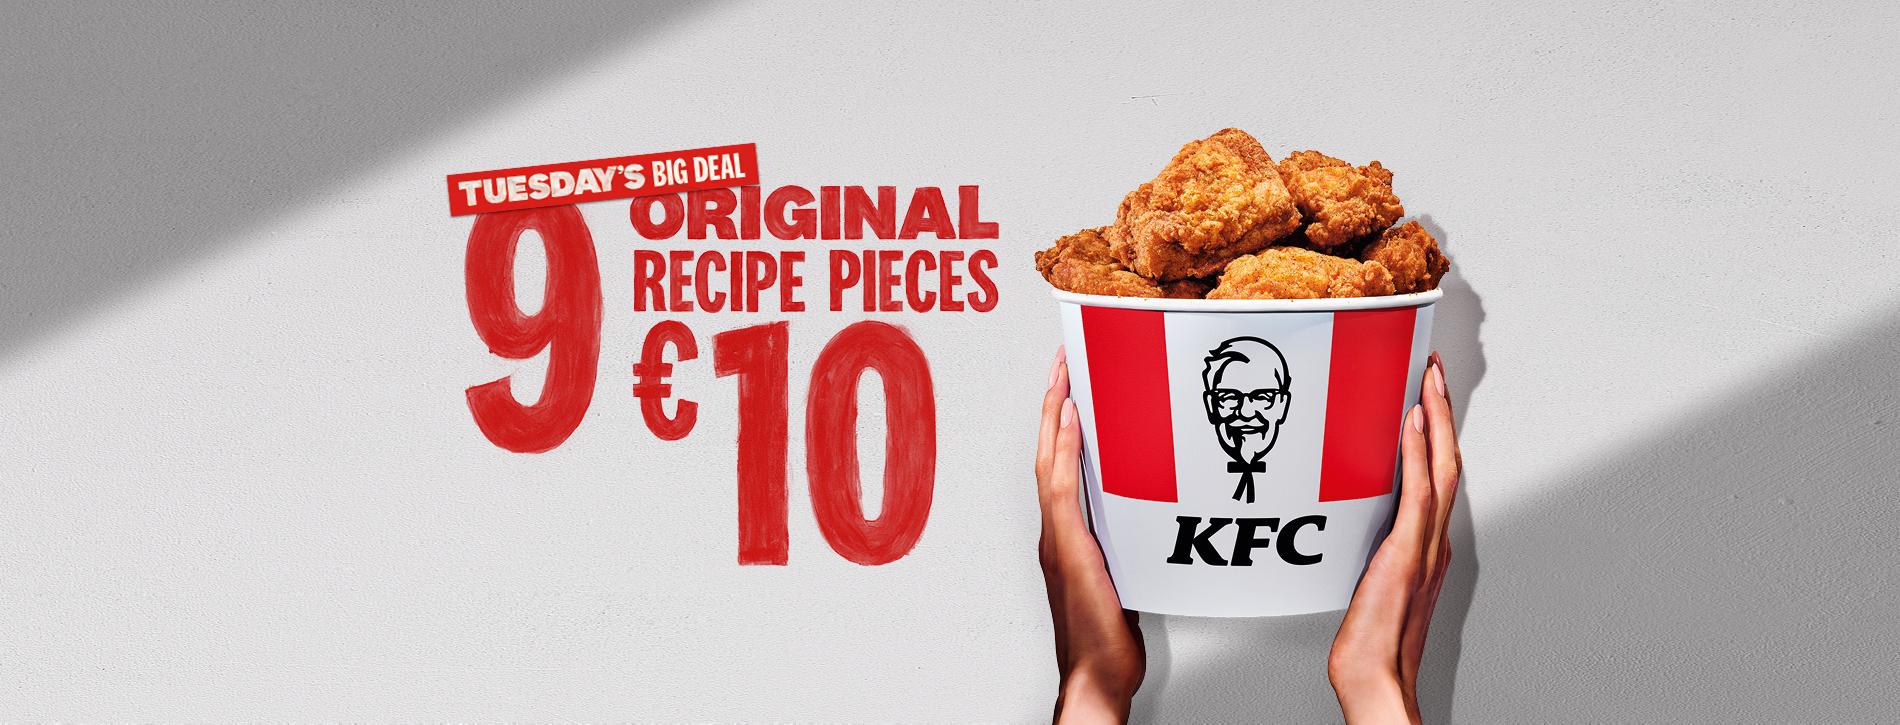 KFC TUESDAY'S BIG DEAL 9 PIECE BUCKET FOR €10. Available every